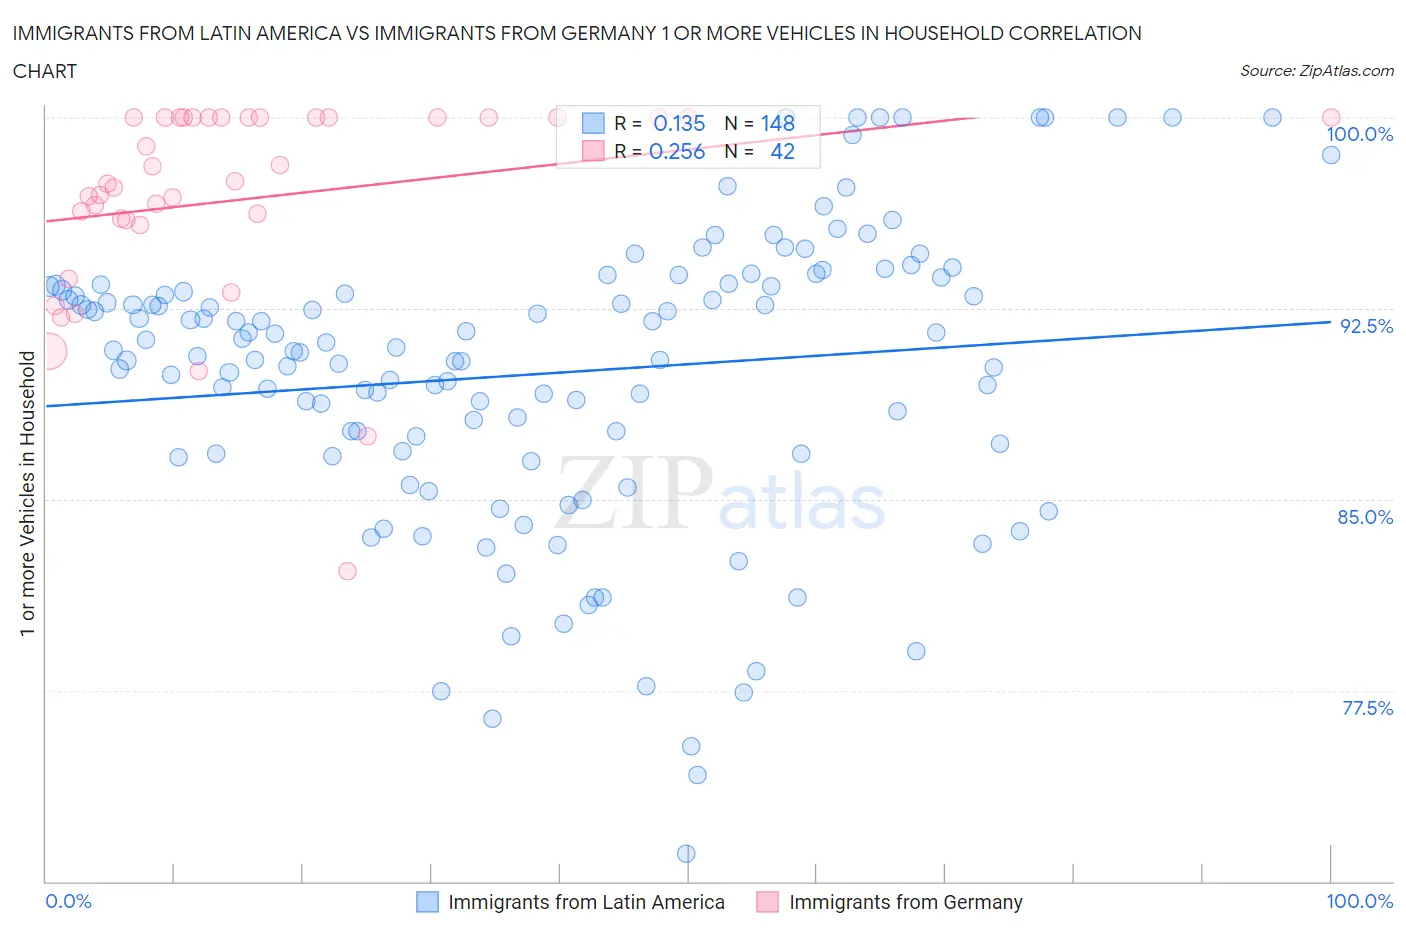 Immigrants from Latin America vs Immigrants from Germany 1 or more Vehicles in Household